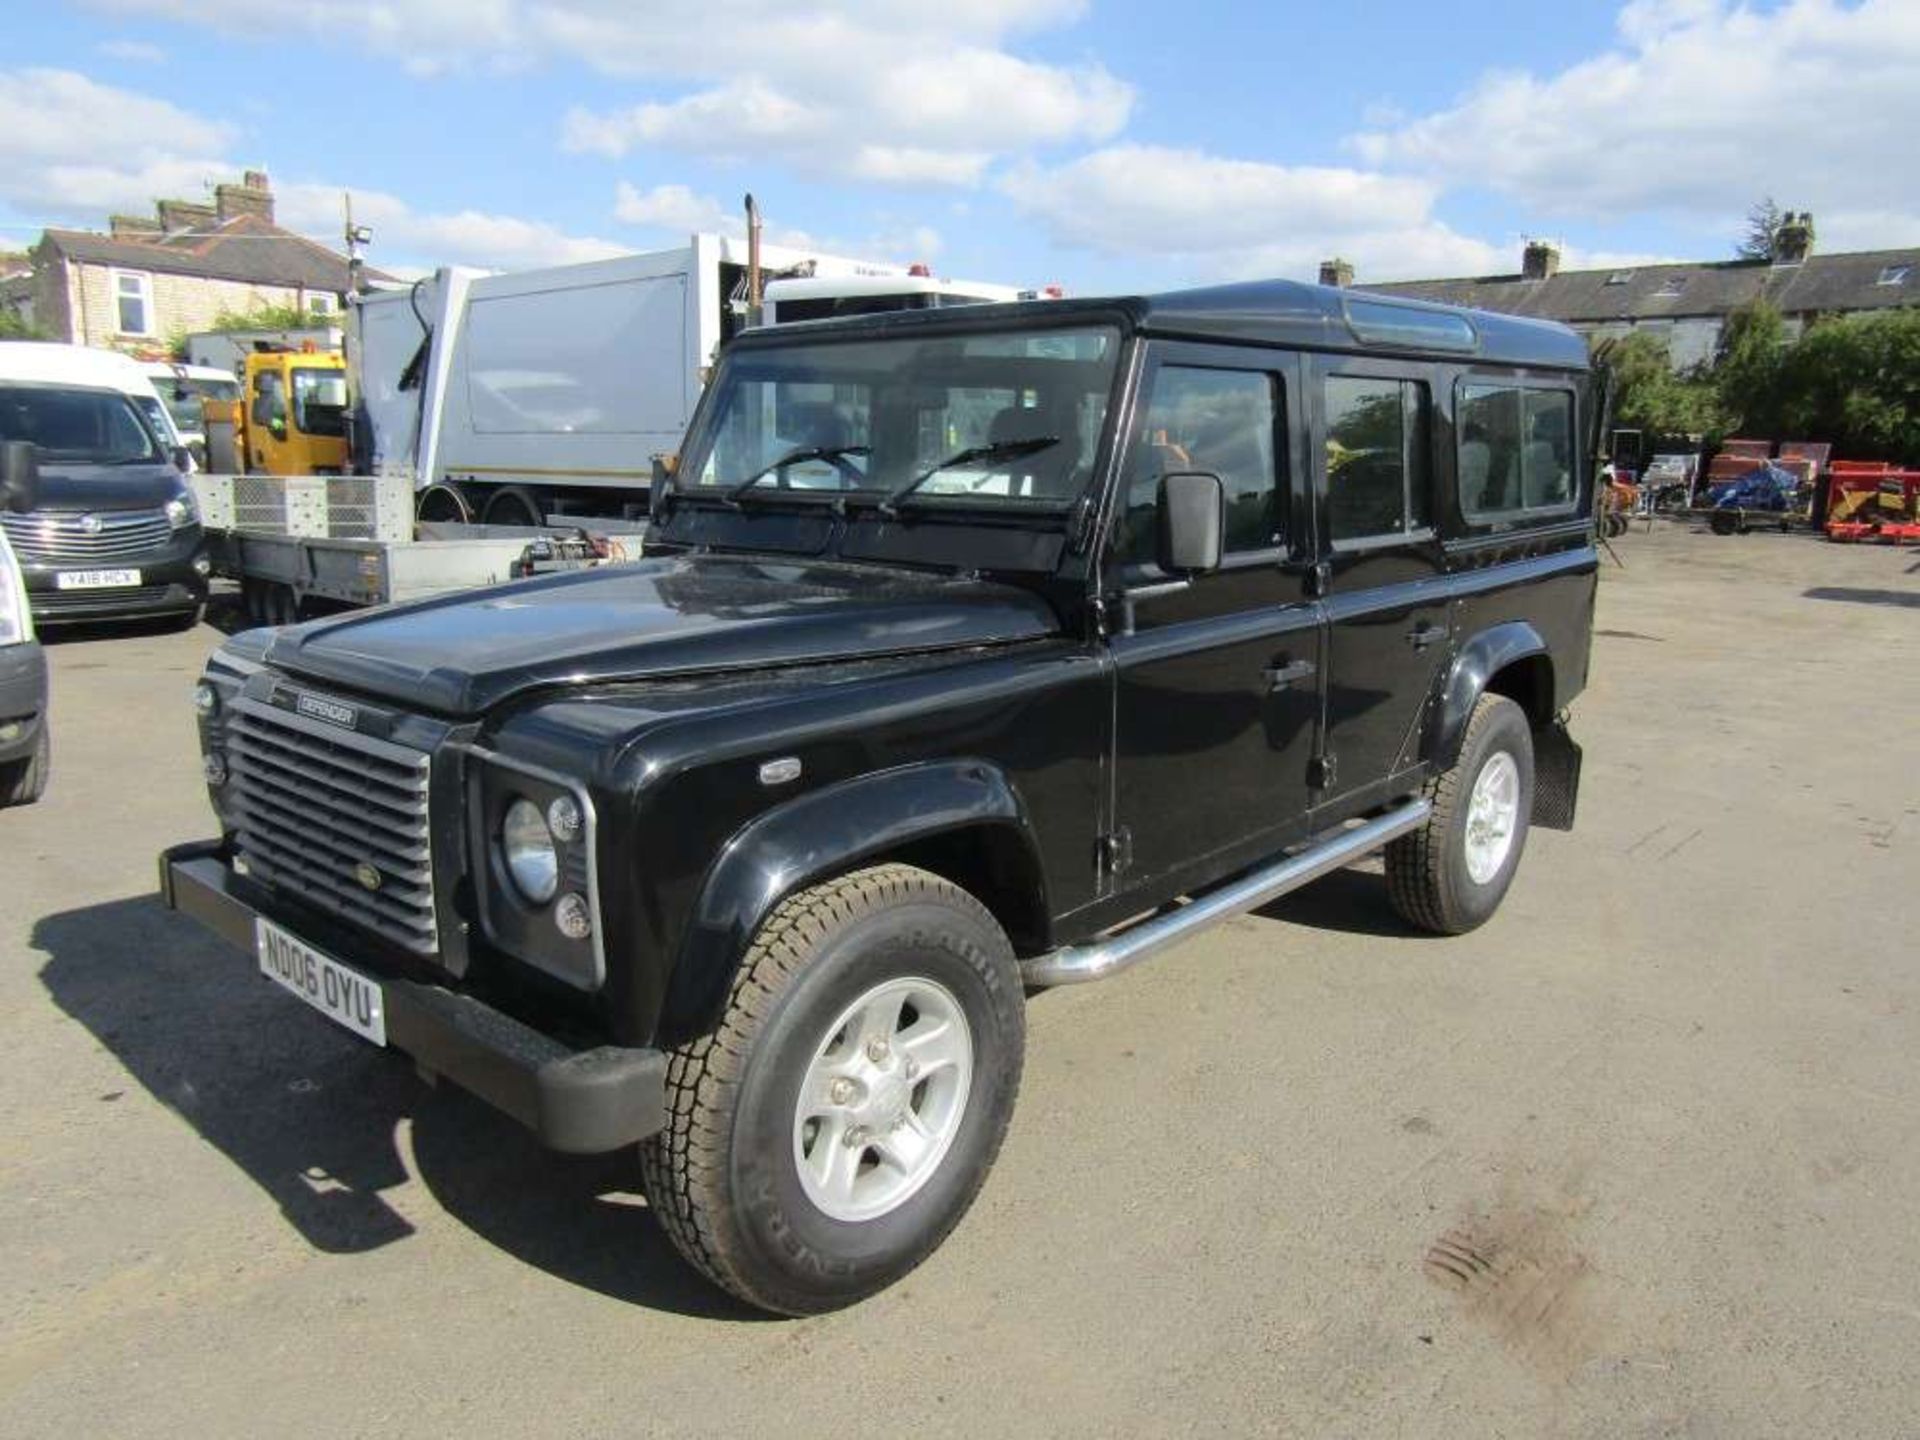 2006 06 reg Land Rover Defender 110 TD5 XS County - Image 2 of 8